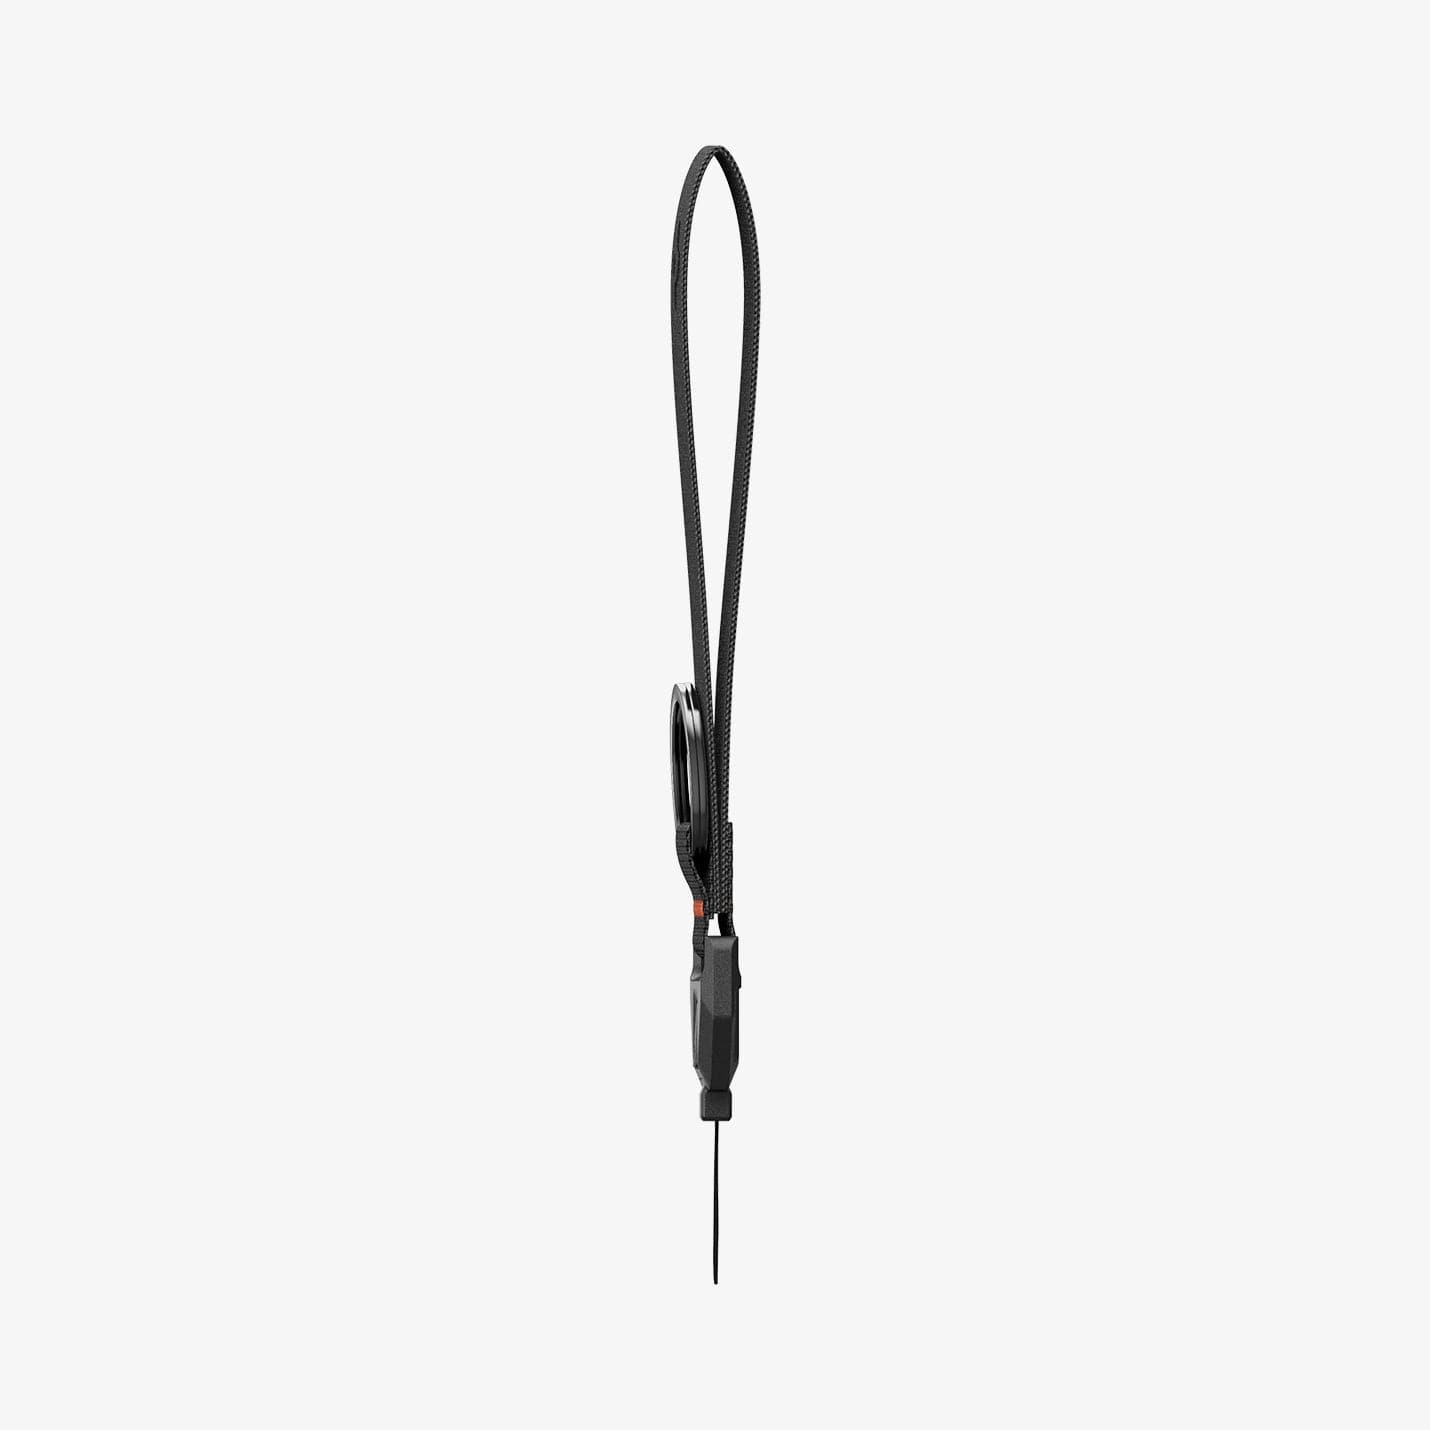 ASD05860 - AirPods Series Lanyard + Keychain in black showing the side of the lanyard